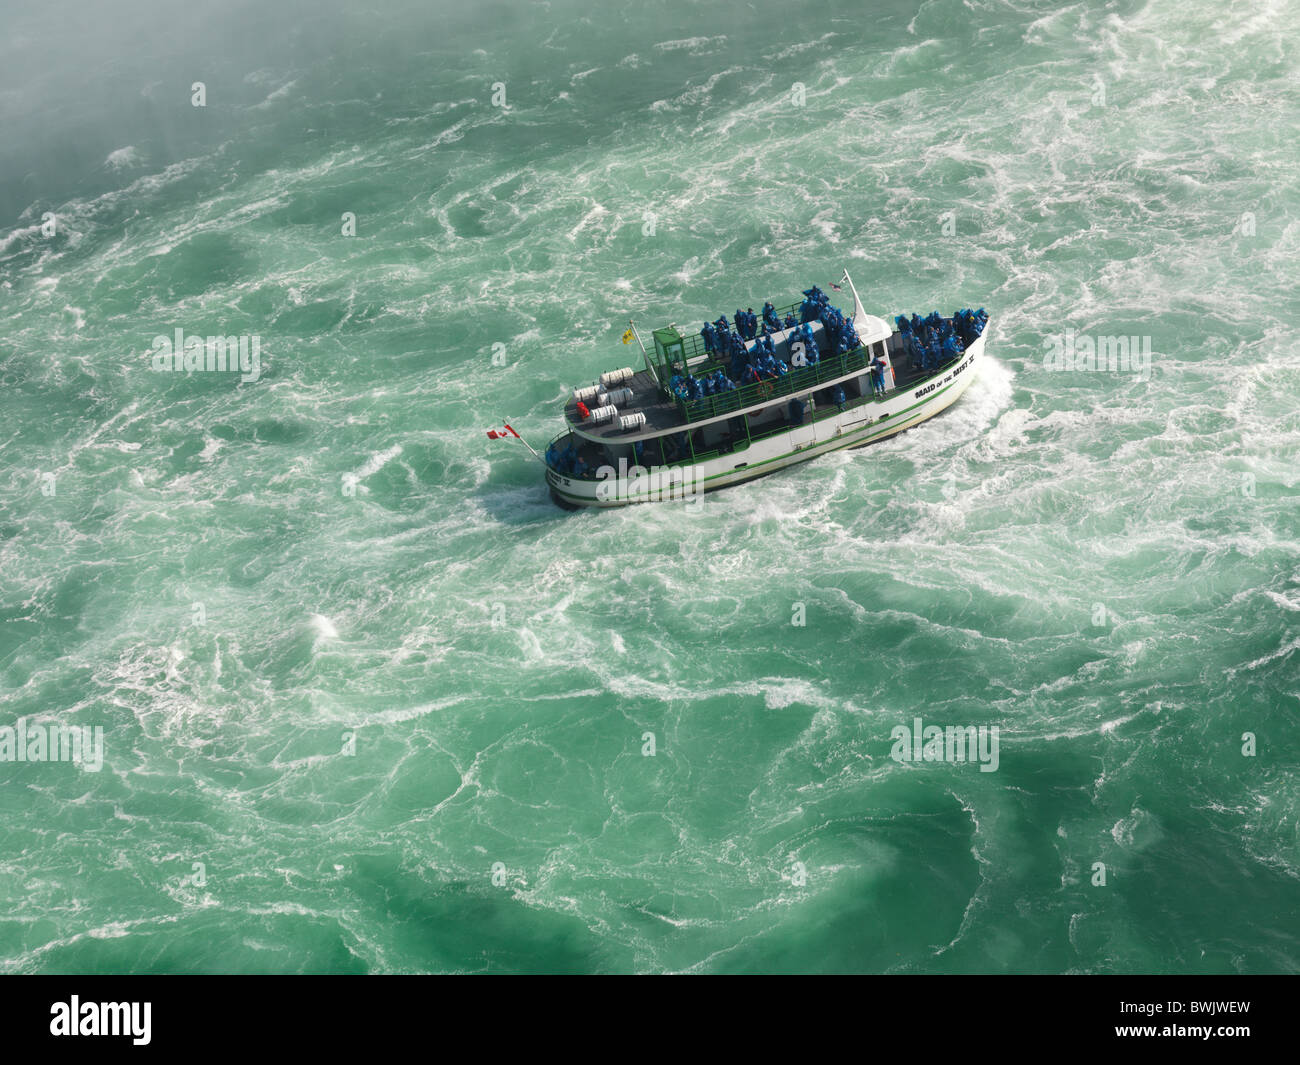 People on Made of the Mist boat ride approaching Niagara Falls Horseshoe Stock Photo